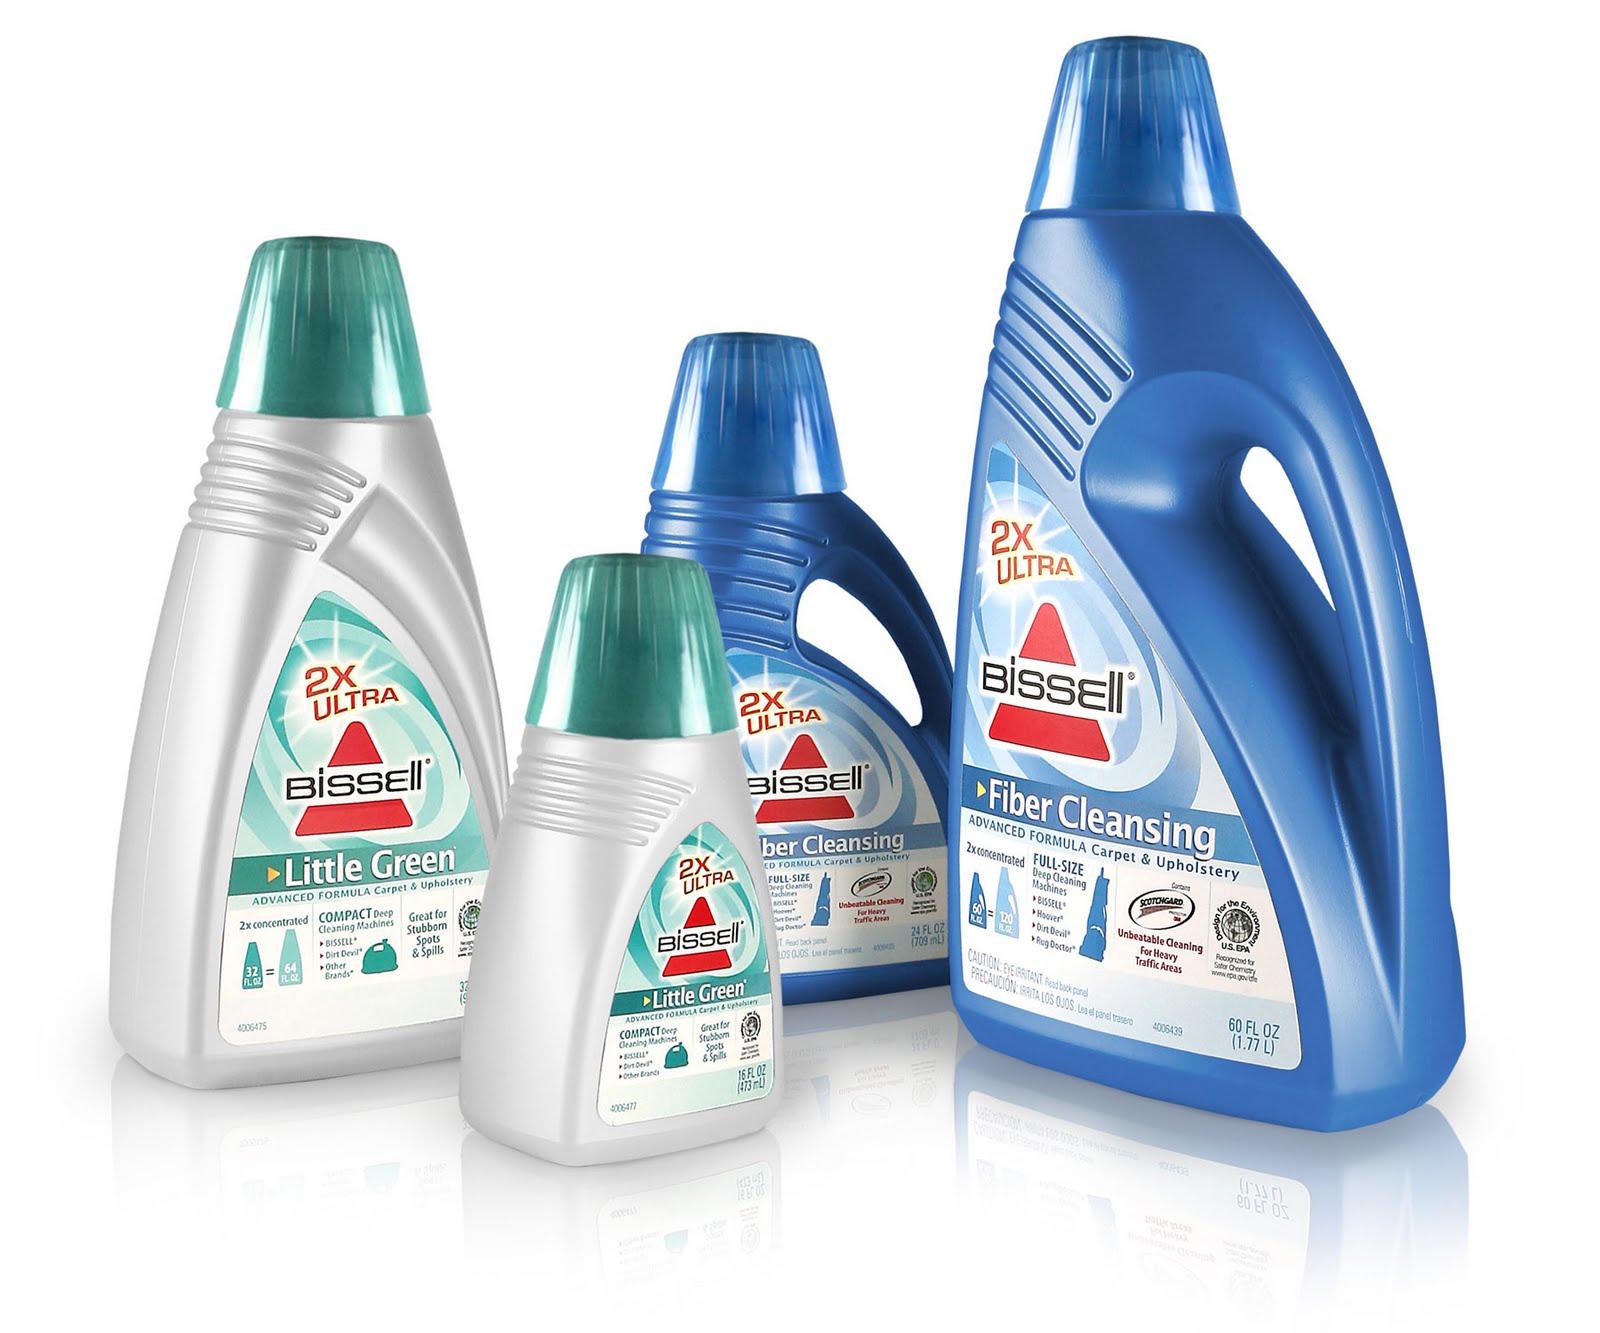 coupon-clipping-in-canada-5-off-bissell-carpet-cleaning-solution